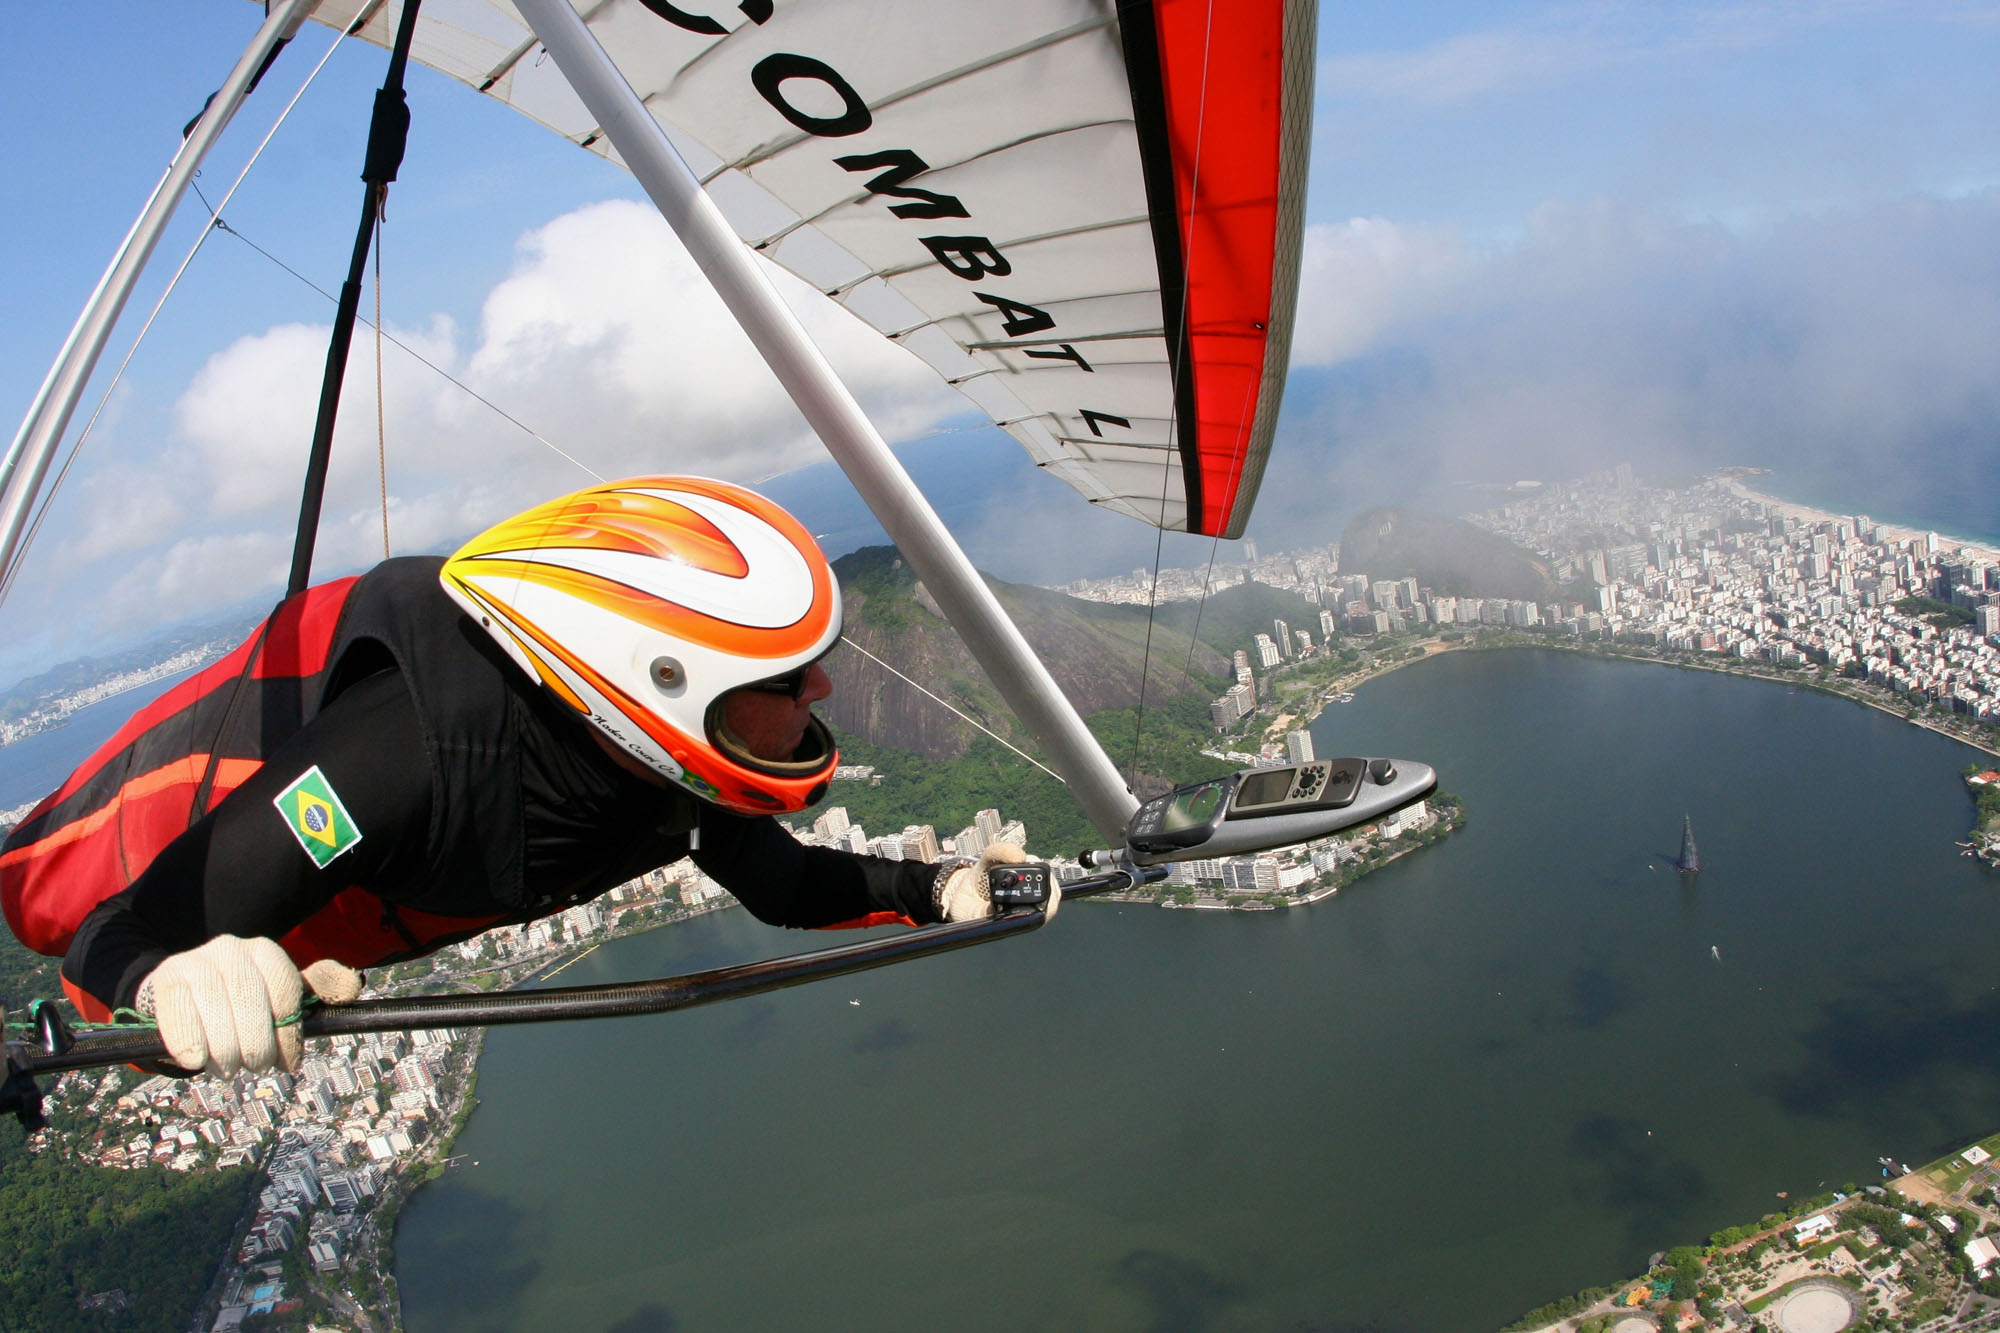 IV. Major Hang Gliding Events Around the World